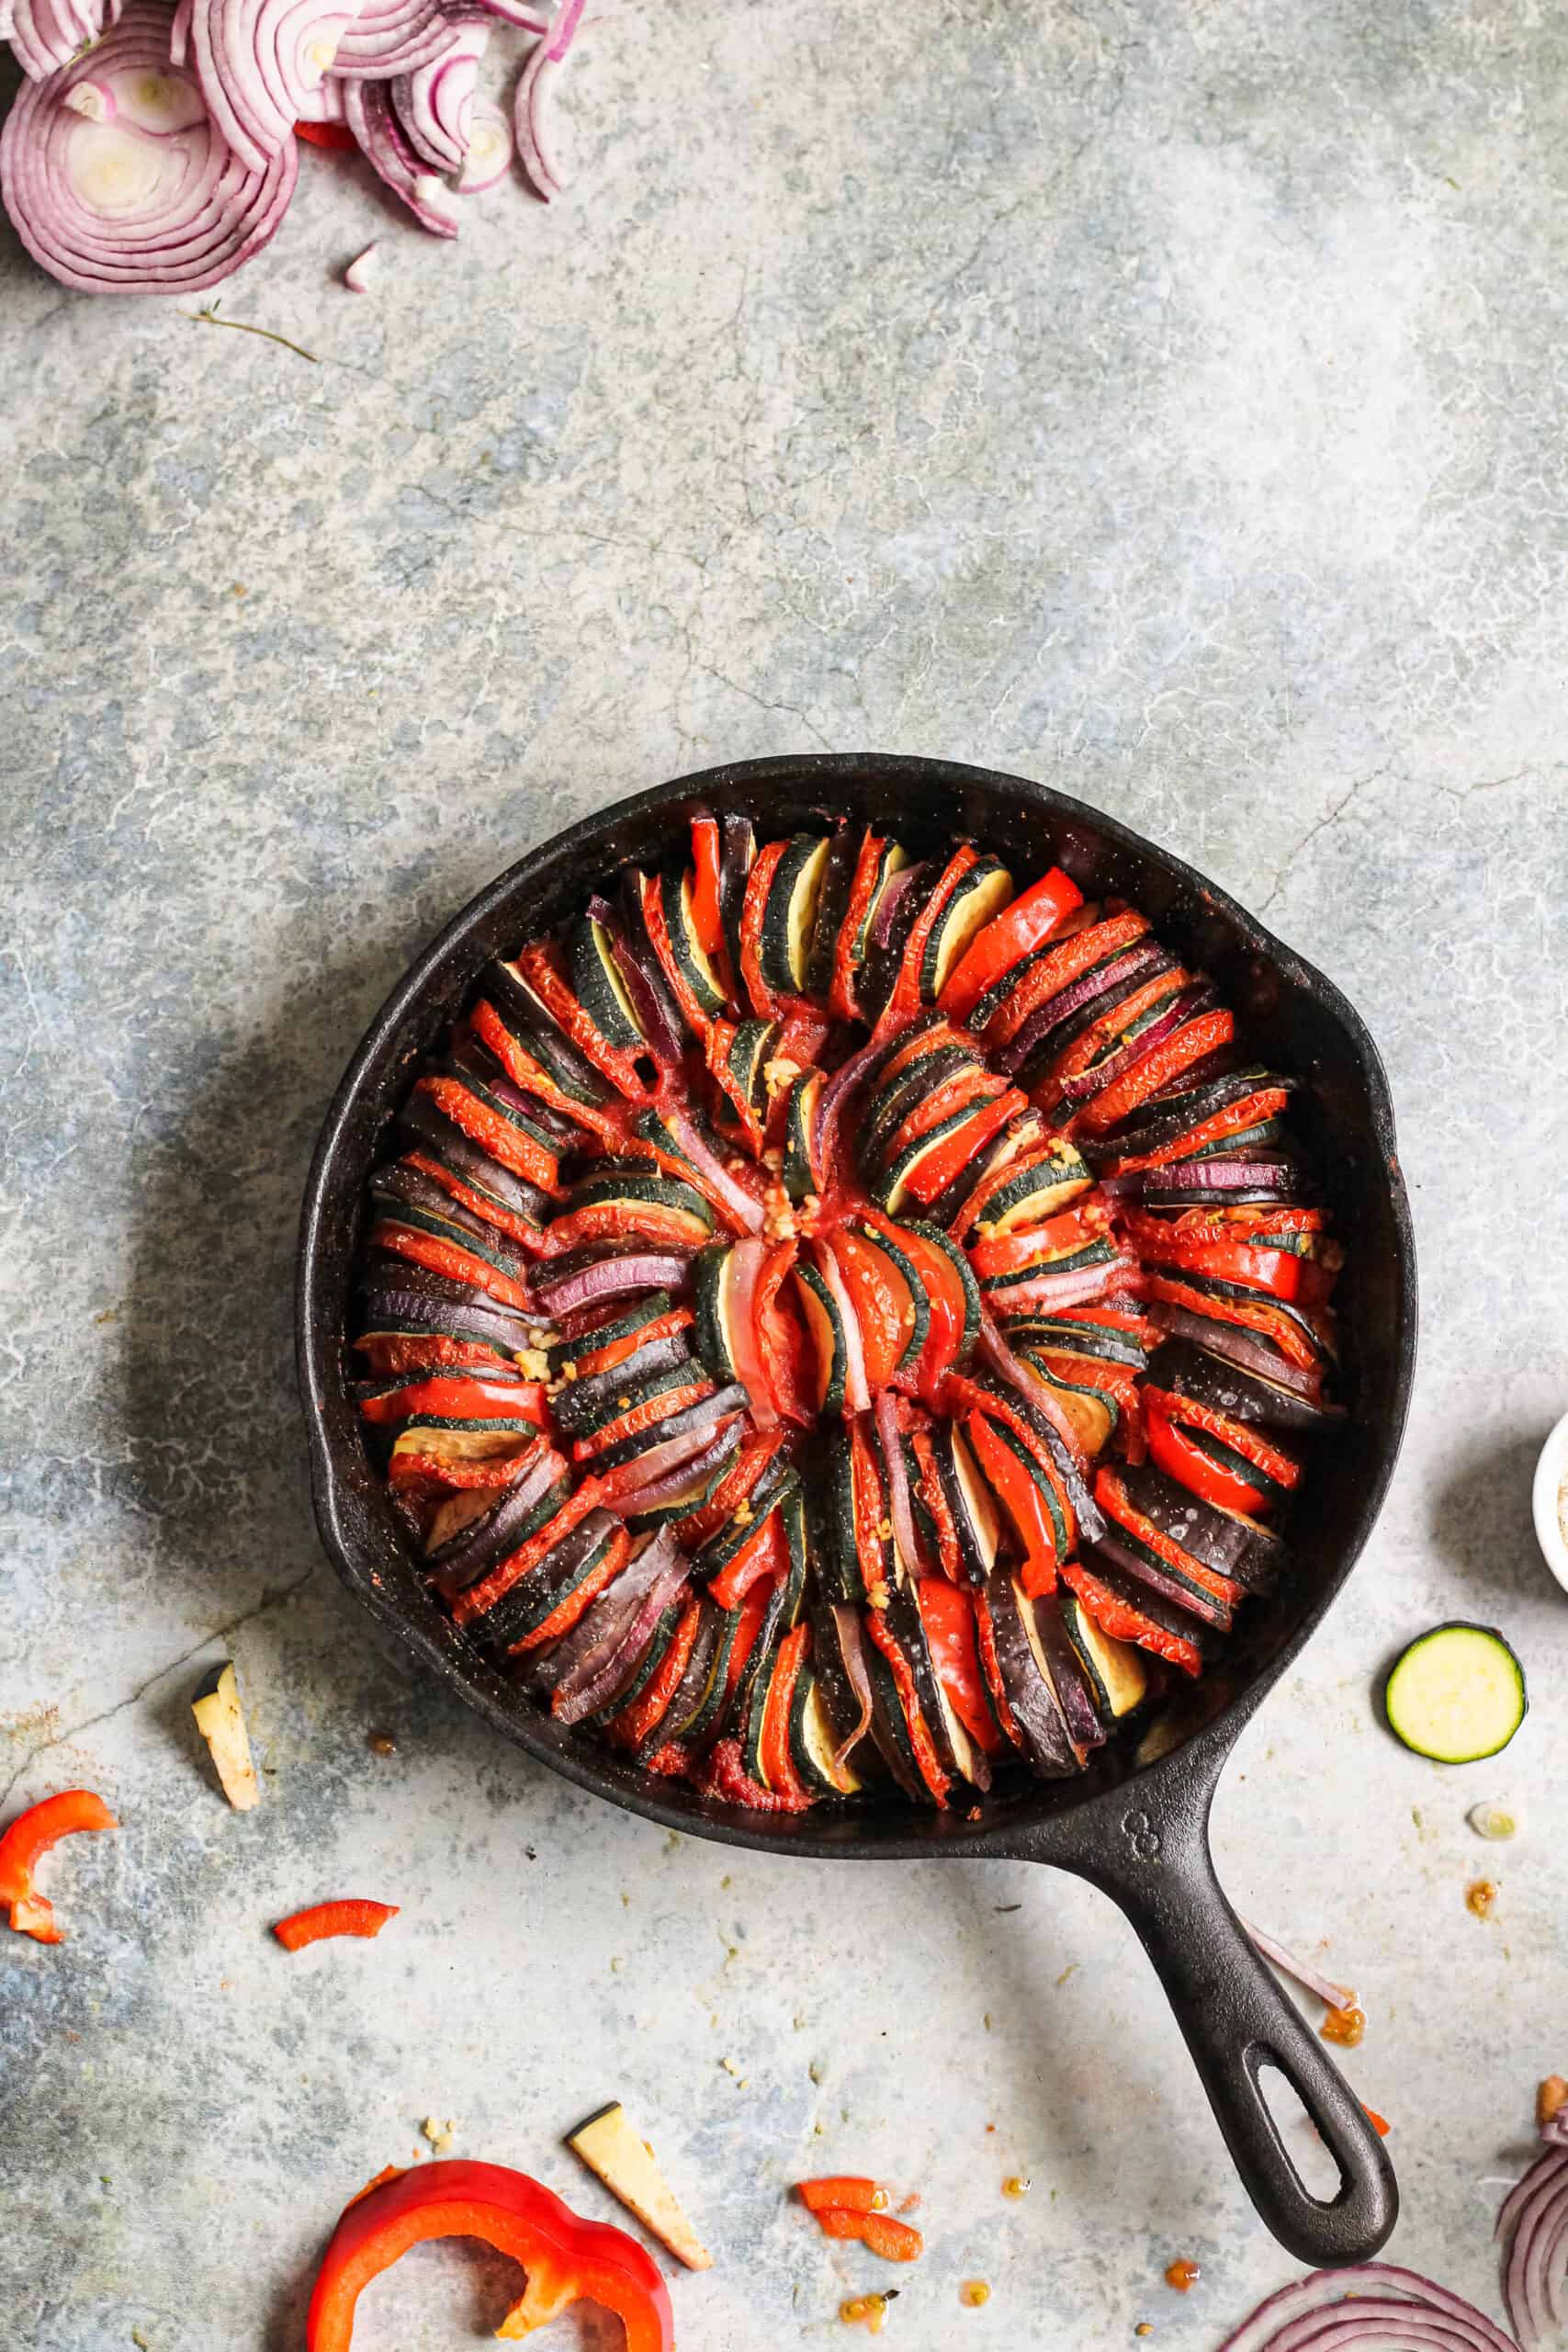 Ratatouille in a cast iron skillet surrounded by chopped ingredients.